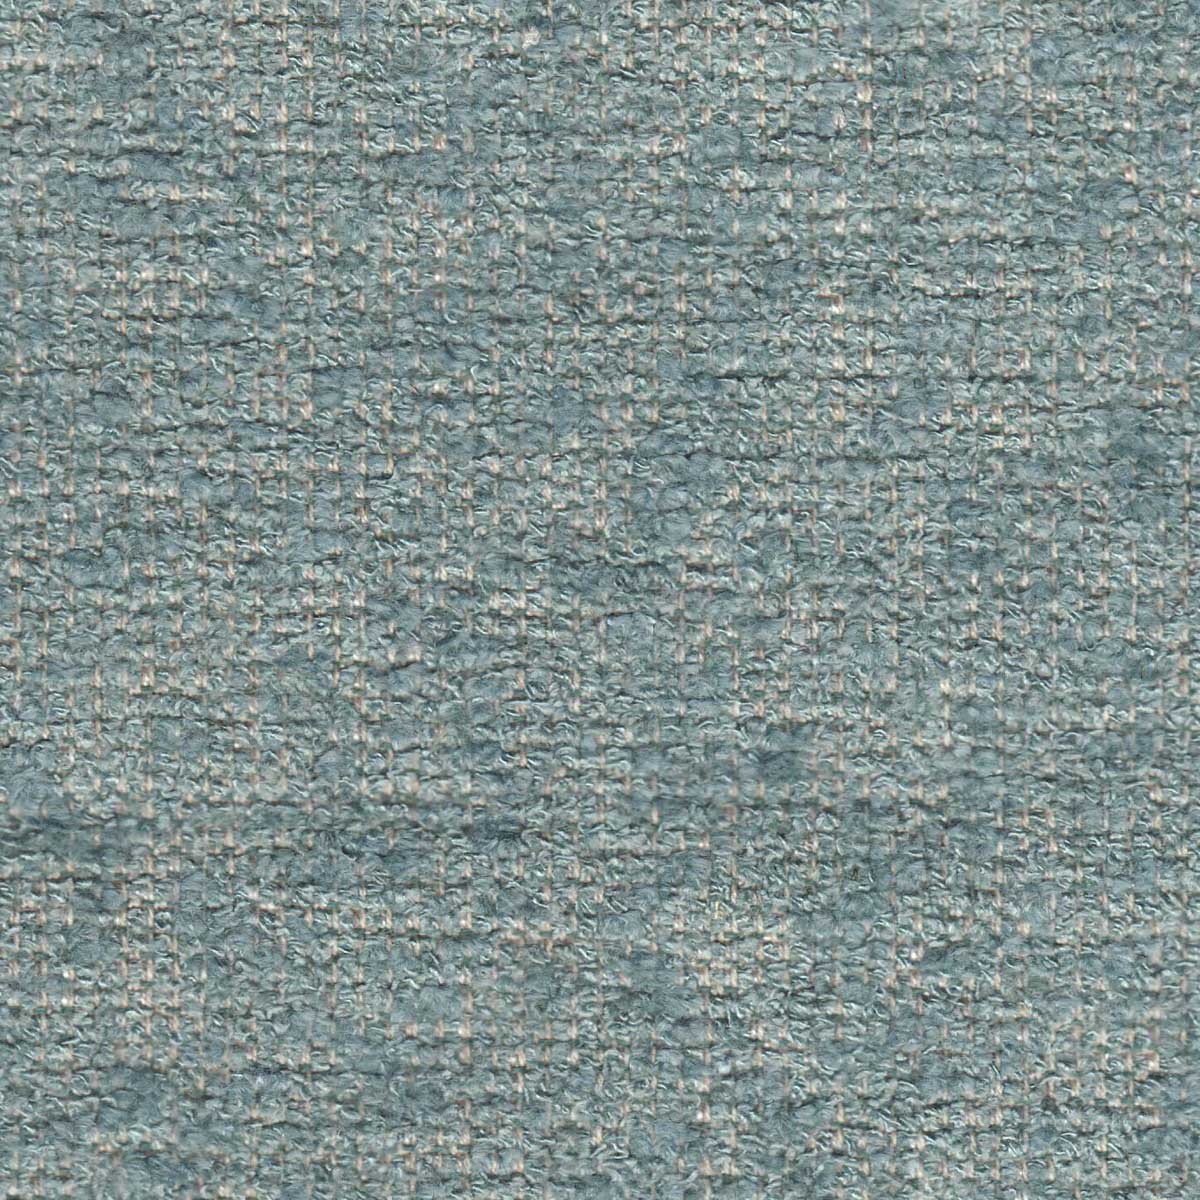 H-STATTON/OCEAN - Upholstery Only Fabric Suitable For Upholstery And Pillows Only.   - Houston